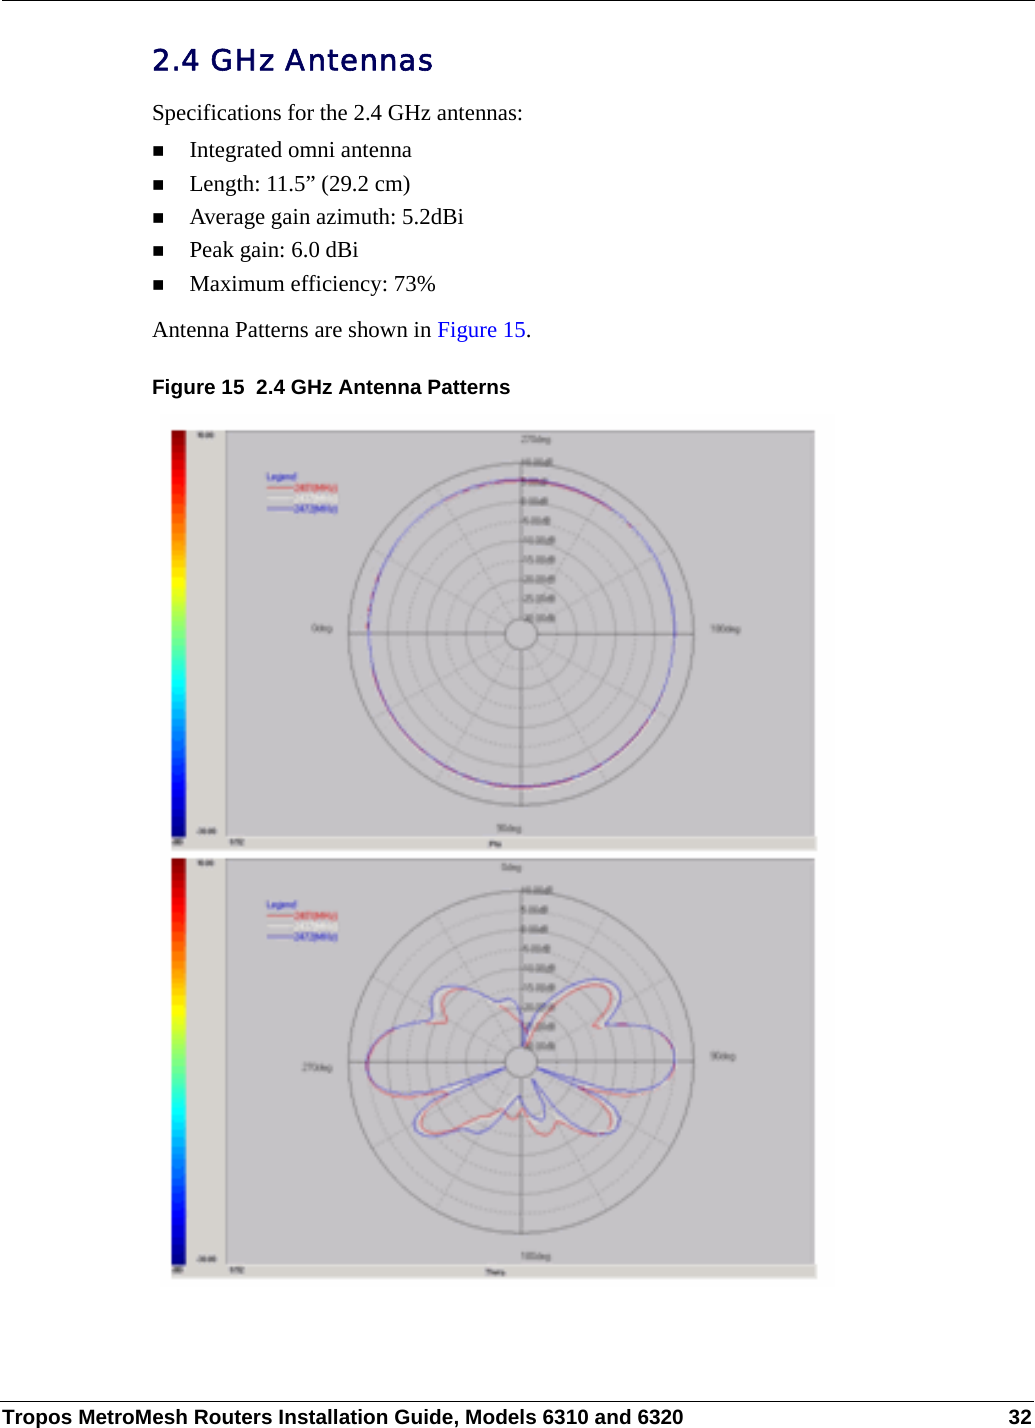 Tropos MetroMesh Routers Installation Guide, Models 6310 and 6320 322.4 GHz AntennasSpecifications for the 2.4 GHz antennas:Integrated omni antennaLength: 11.5” (29.2 cm)Average gain azimuth: 5.2dBiPeak gain: 6.0 dBiMaximum efficiency: 73% Antenna Patterns are shown in Figure 15.Figure 15  2.4 GHz Antenna Patterns